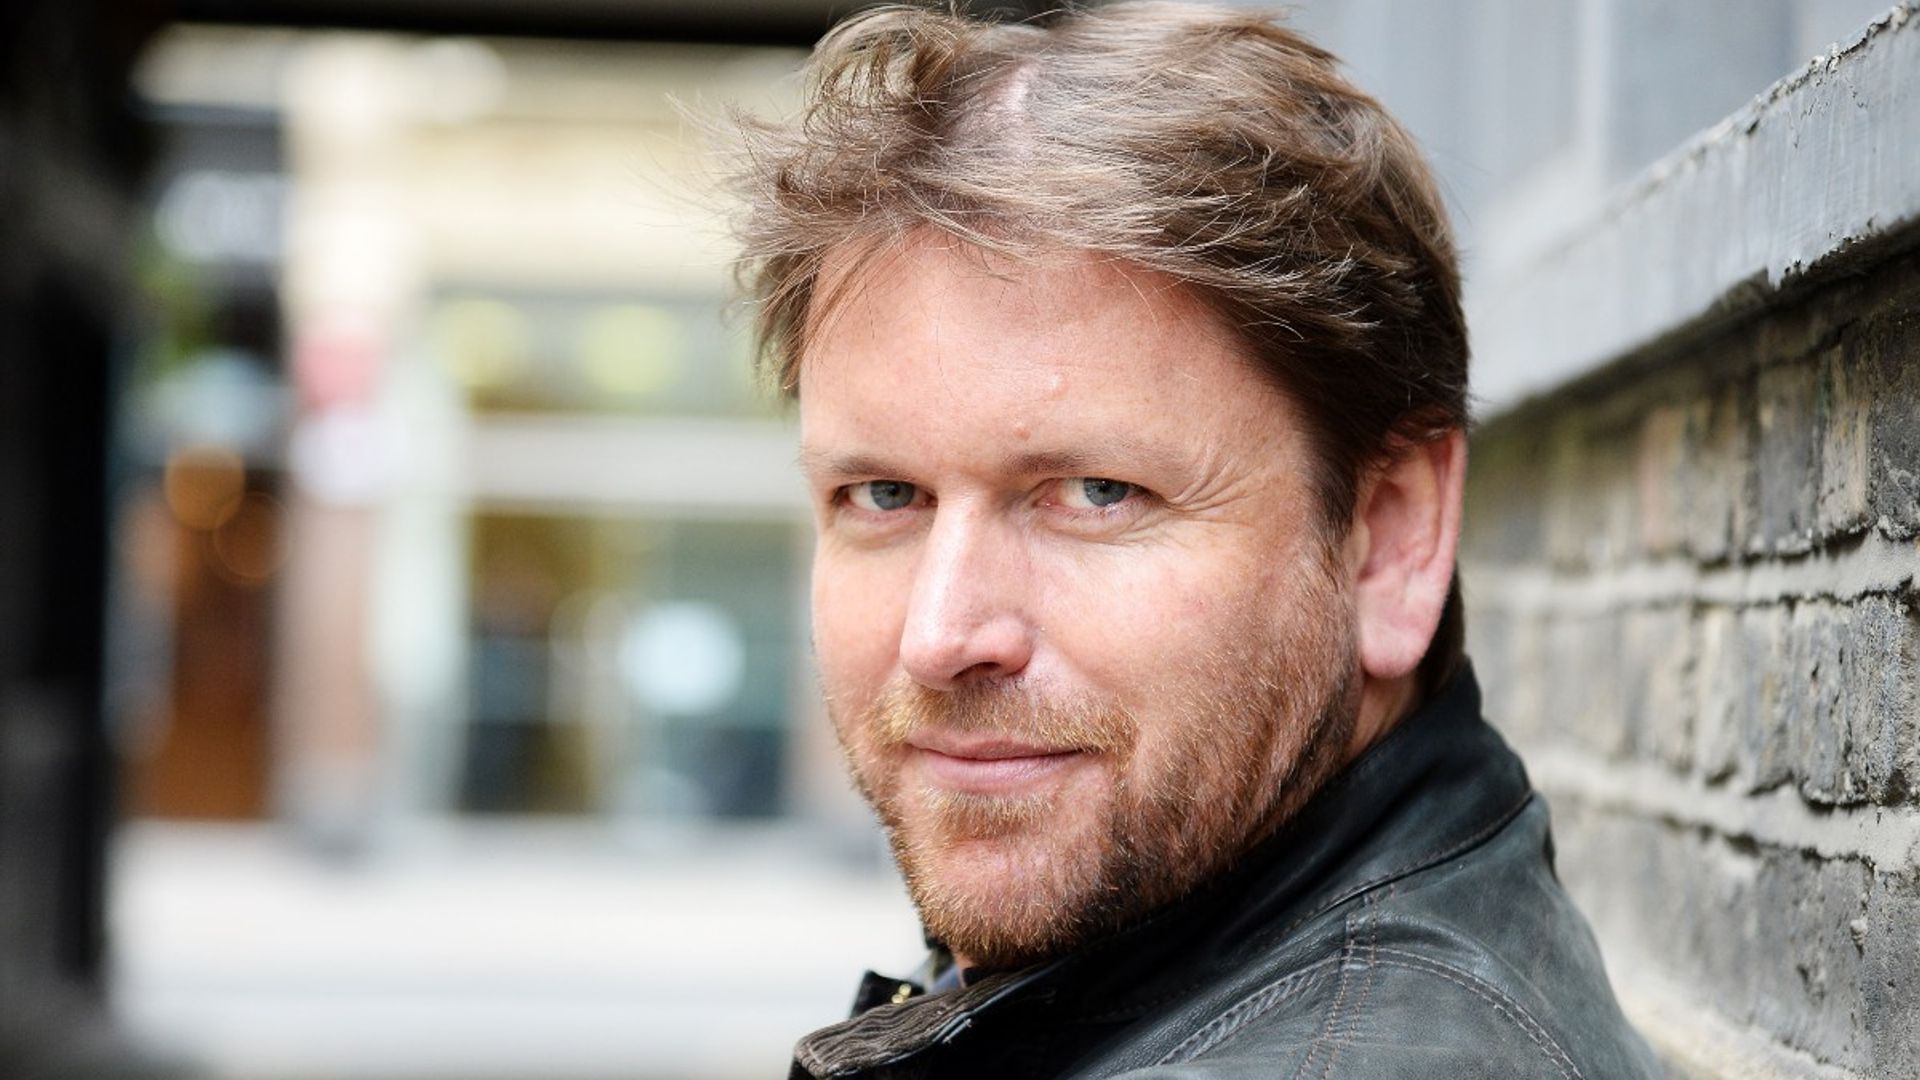 James Martin was rushed to A&E after mystery accident